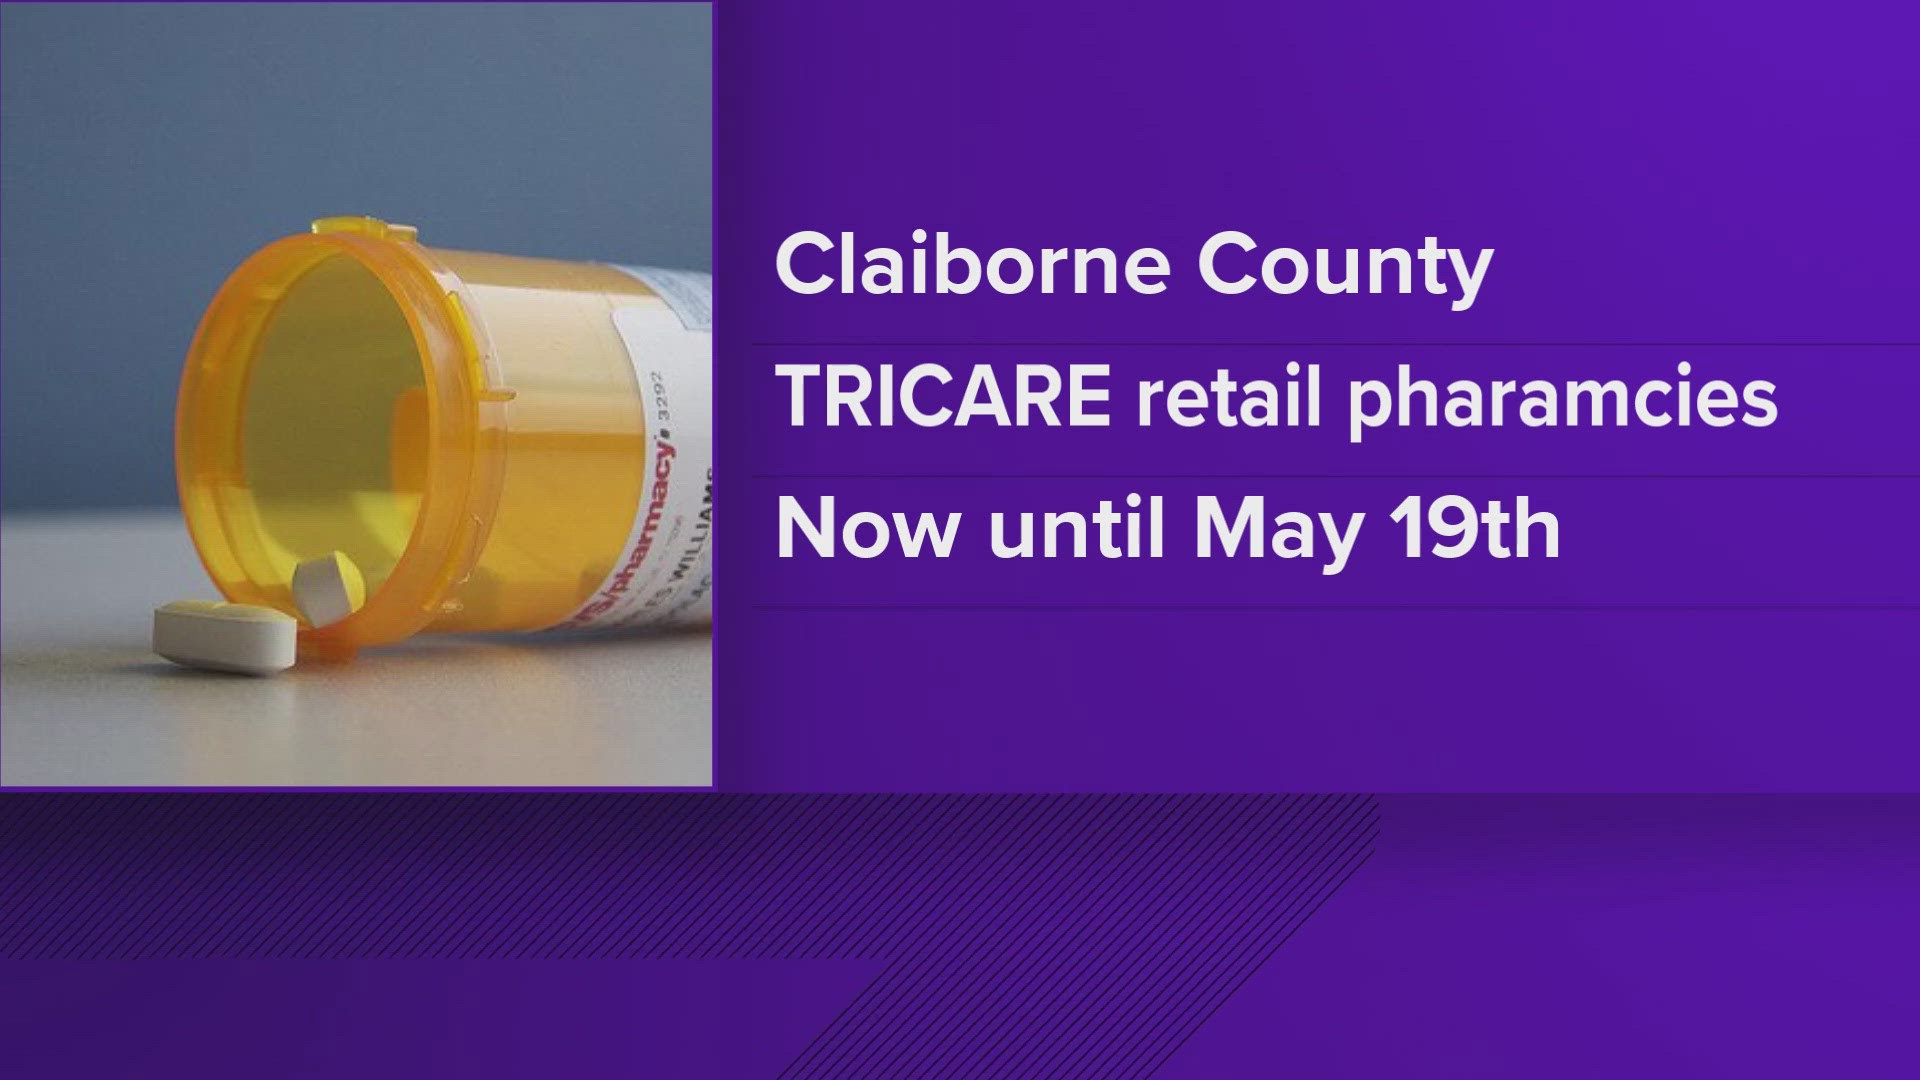 The Defense Health Agency said people with TRICARE benefits can get emergency prescription refills.